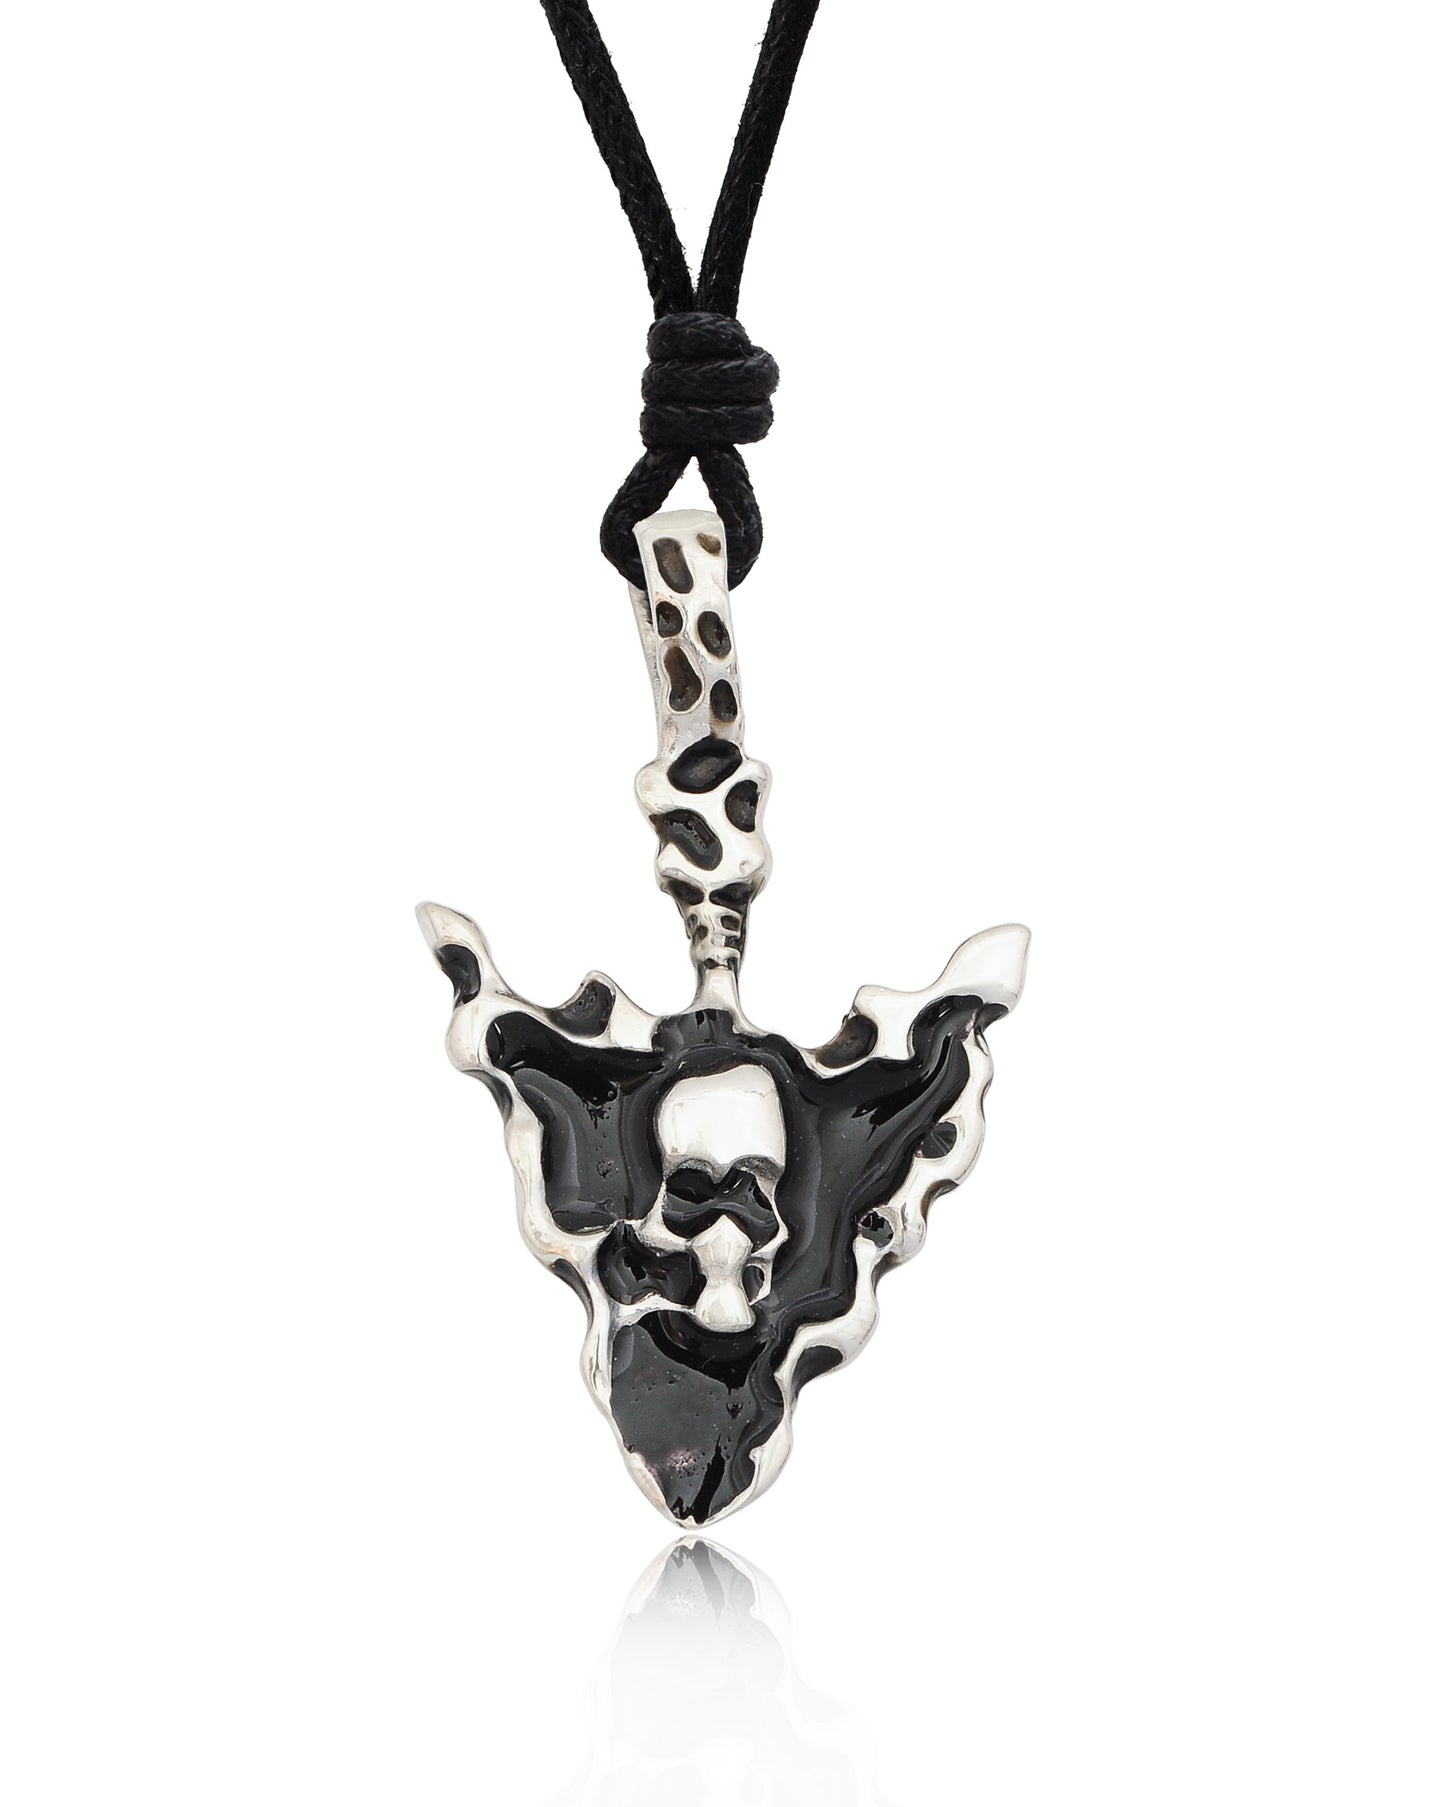 Indian Arrow Head Skull Silver Pewter Charm Necklace Pendant Jewelry